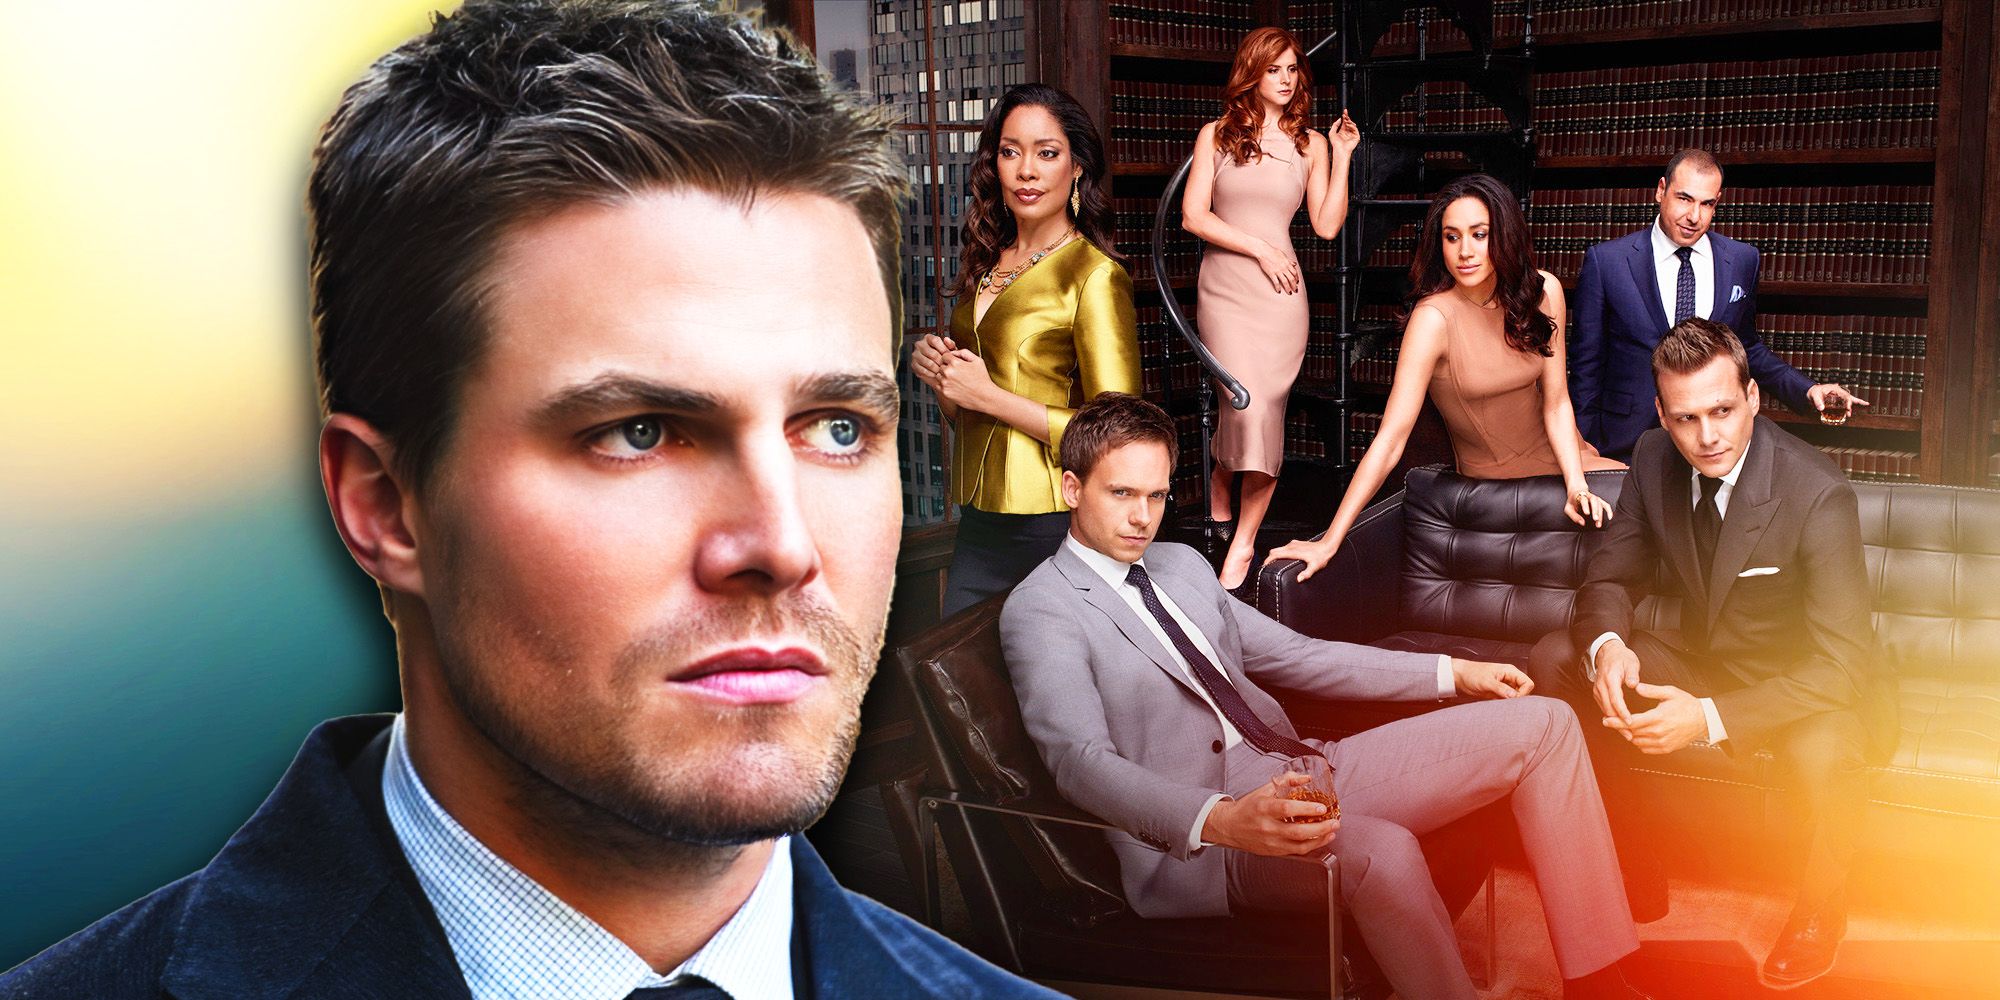 Custom image of Stephen Amell and the cast of Suits